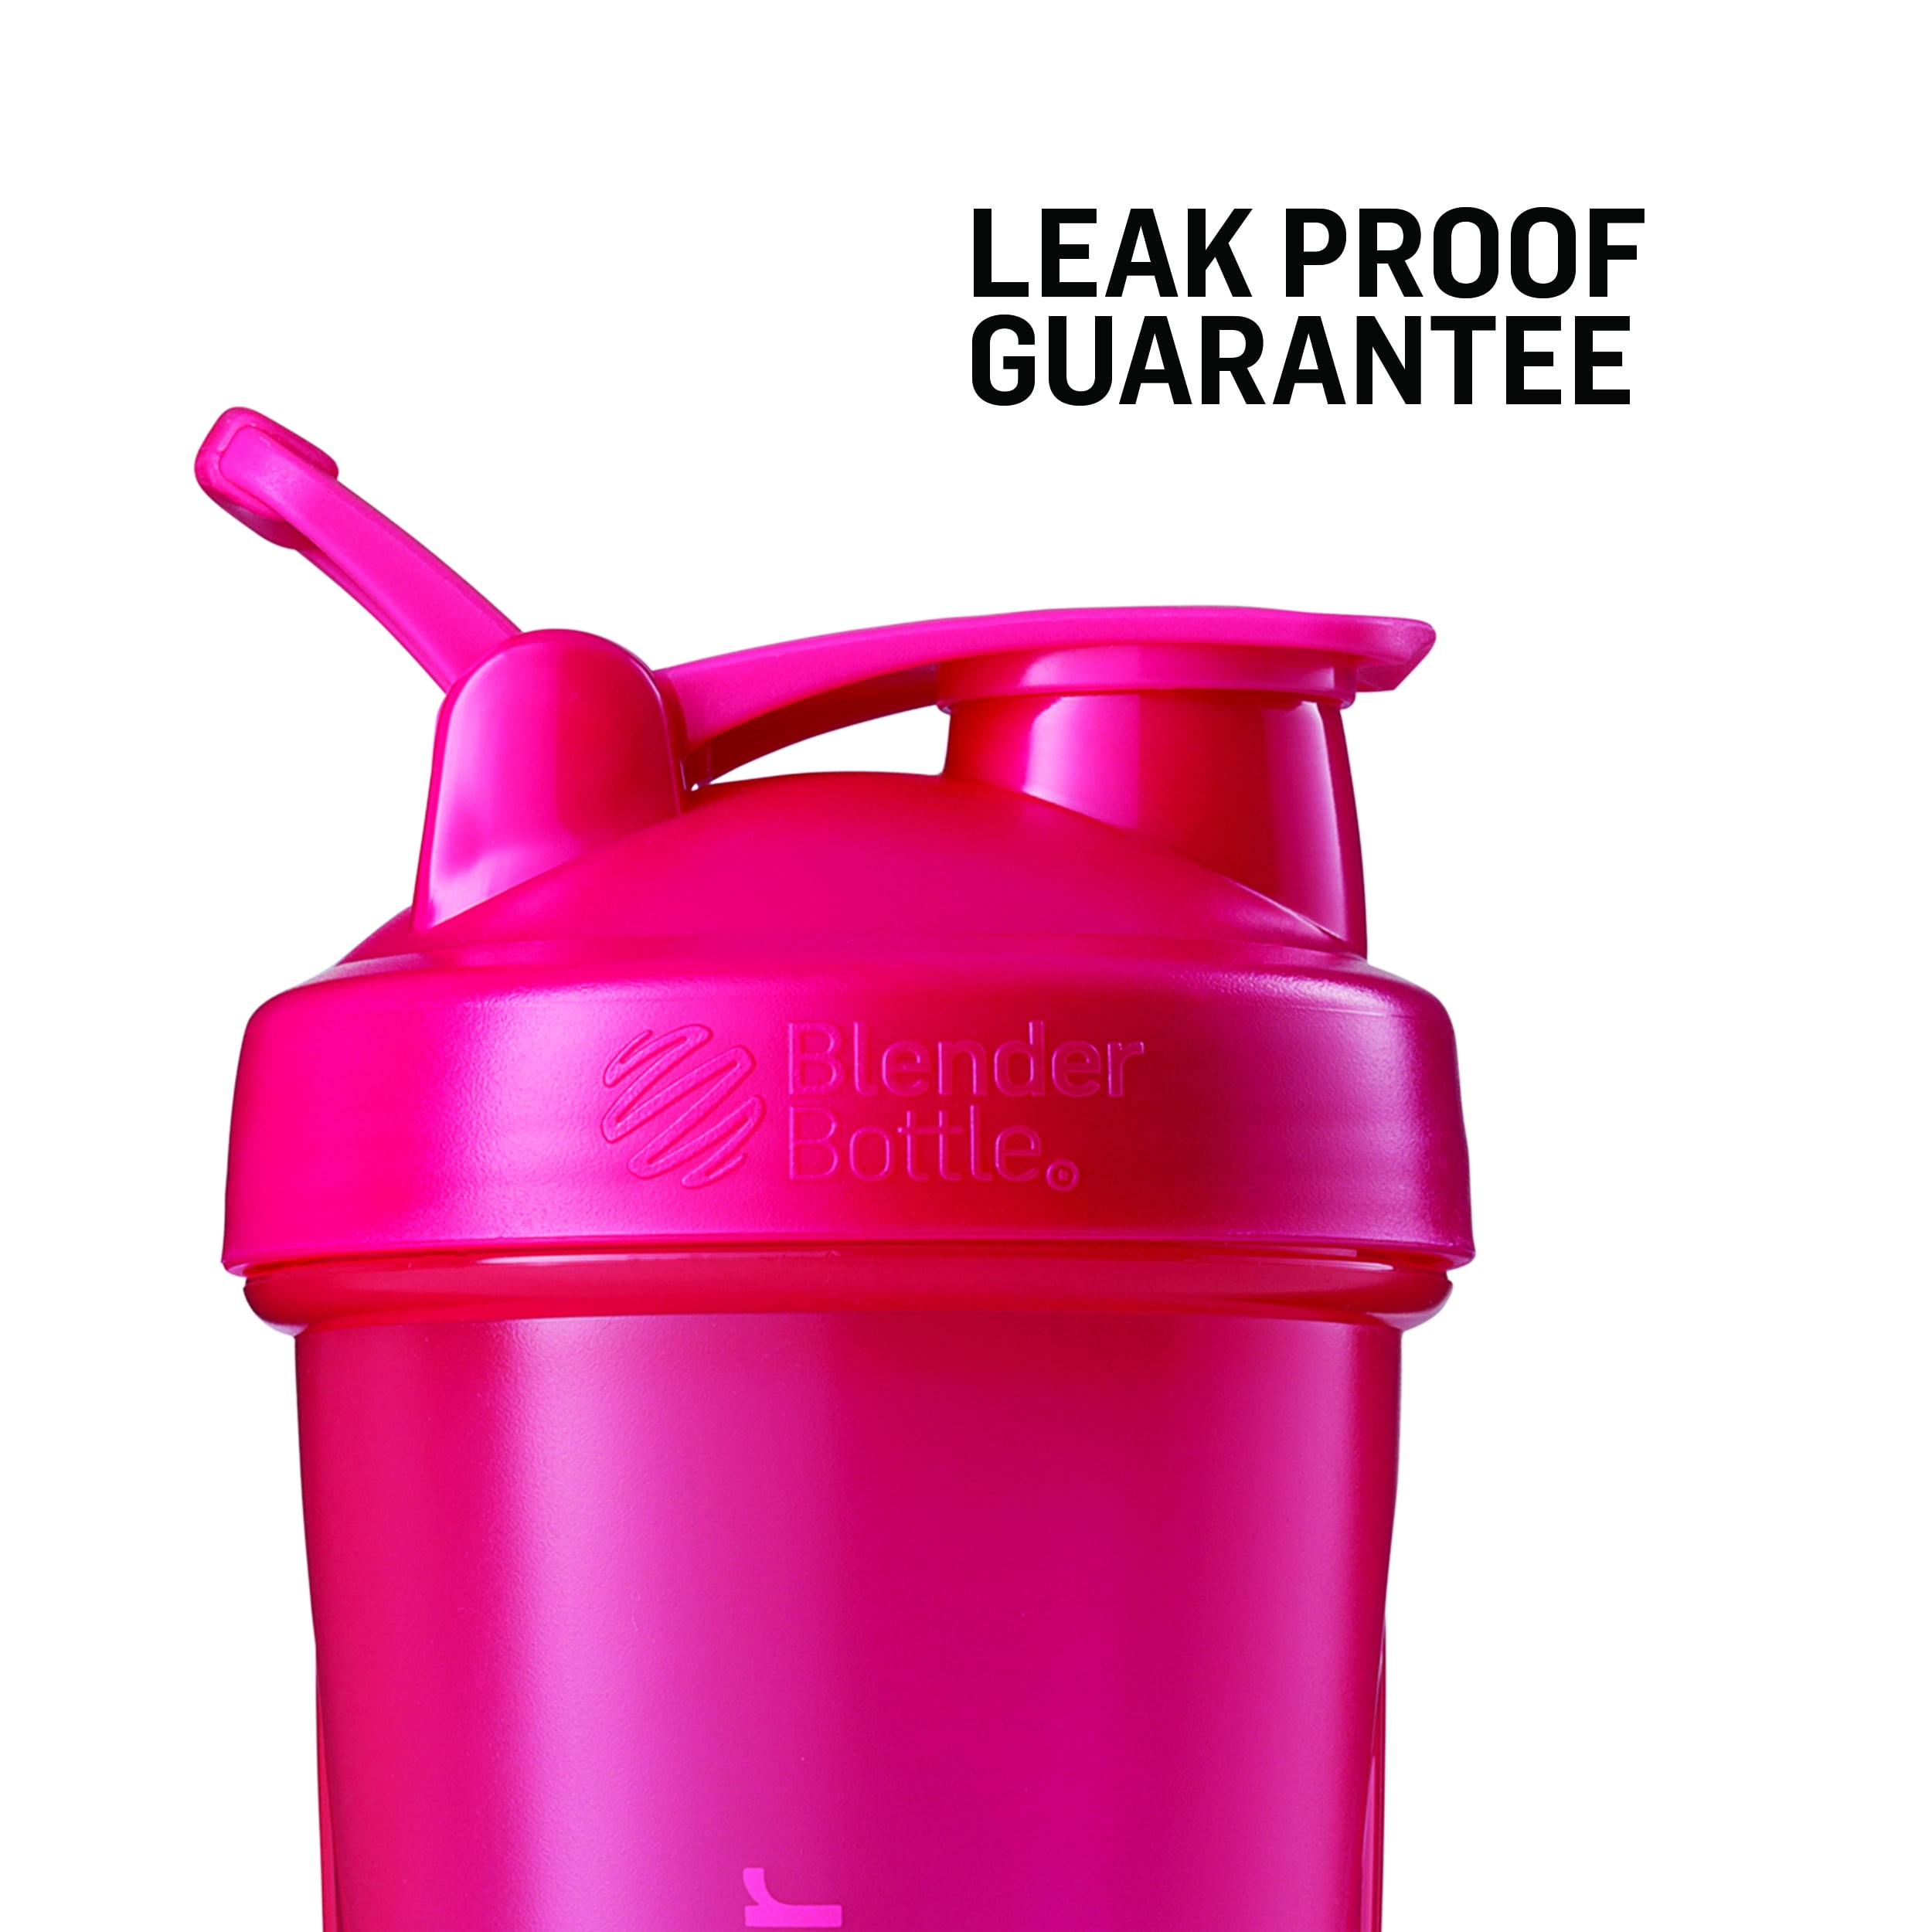 MRI Performance  32 ounce Shaker Cup